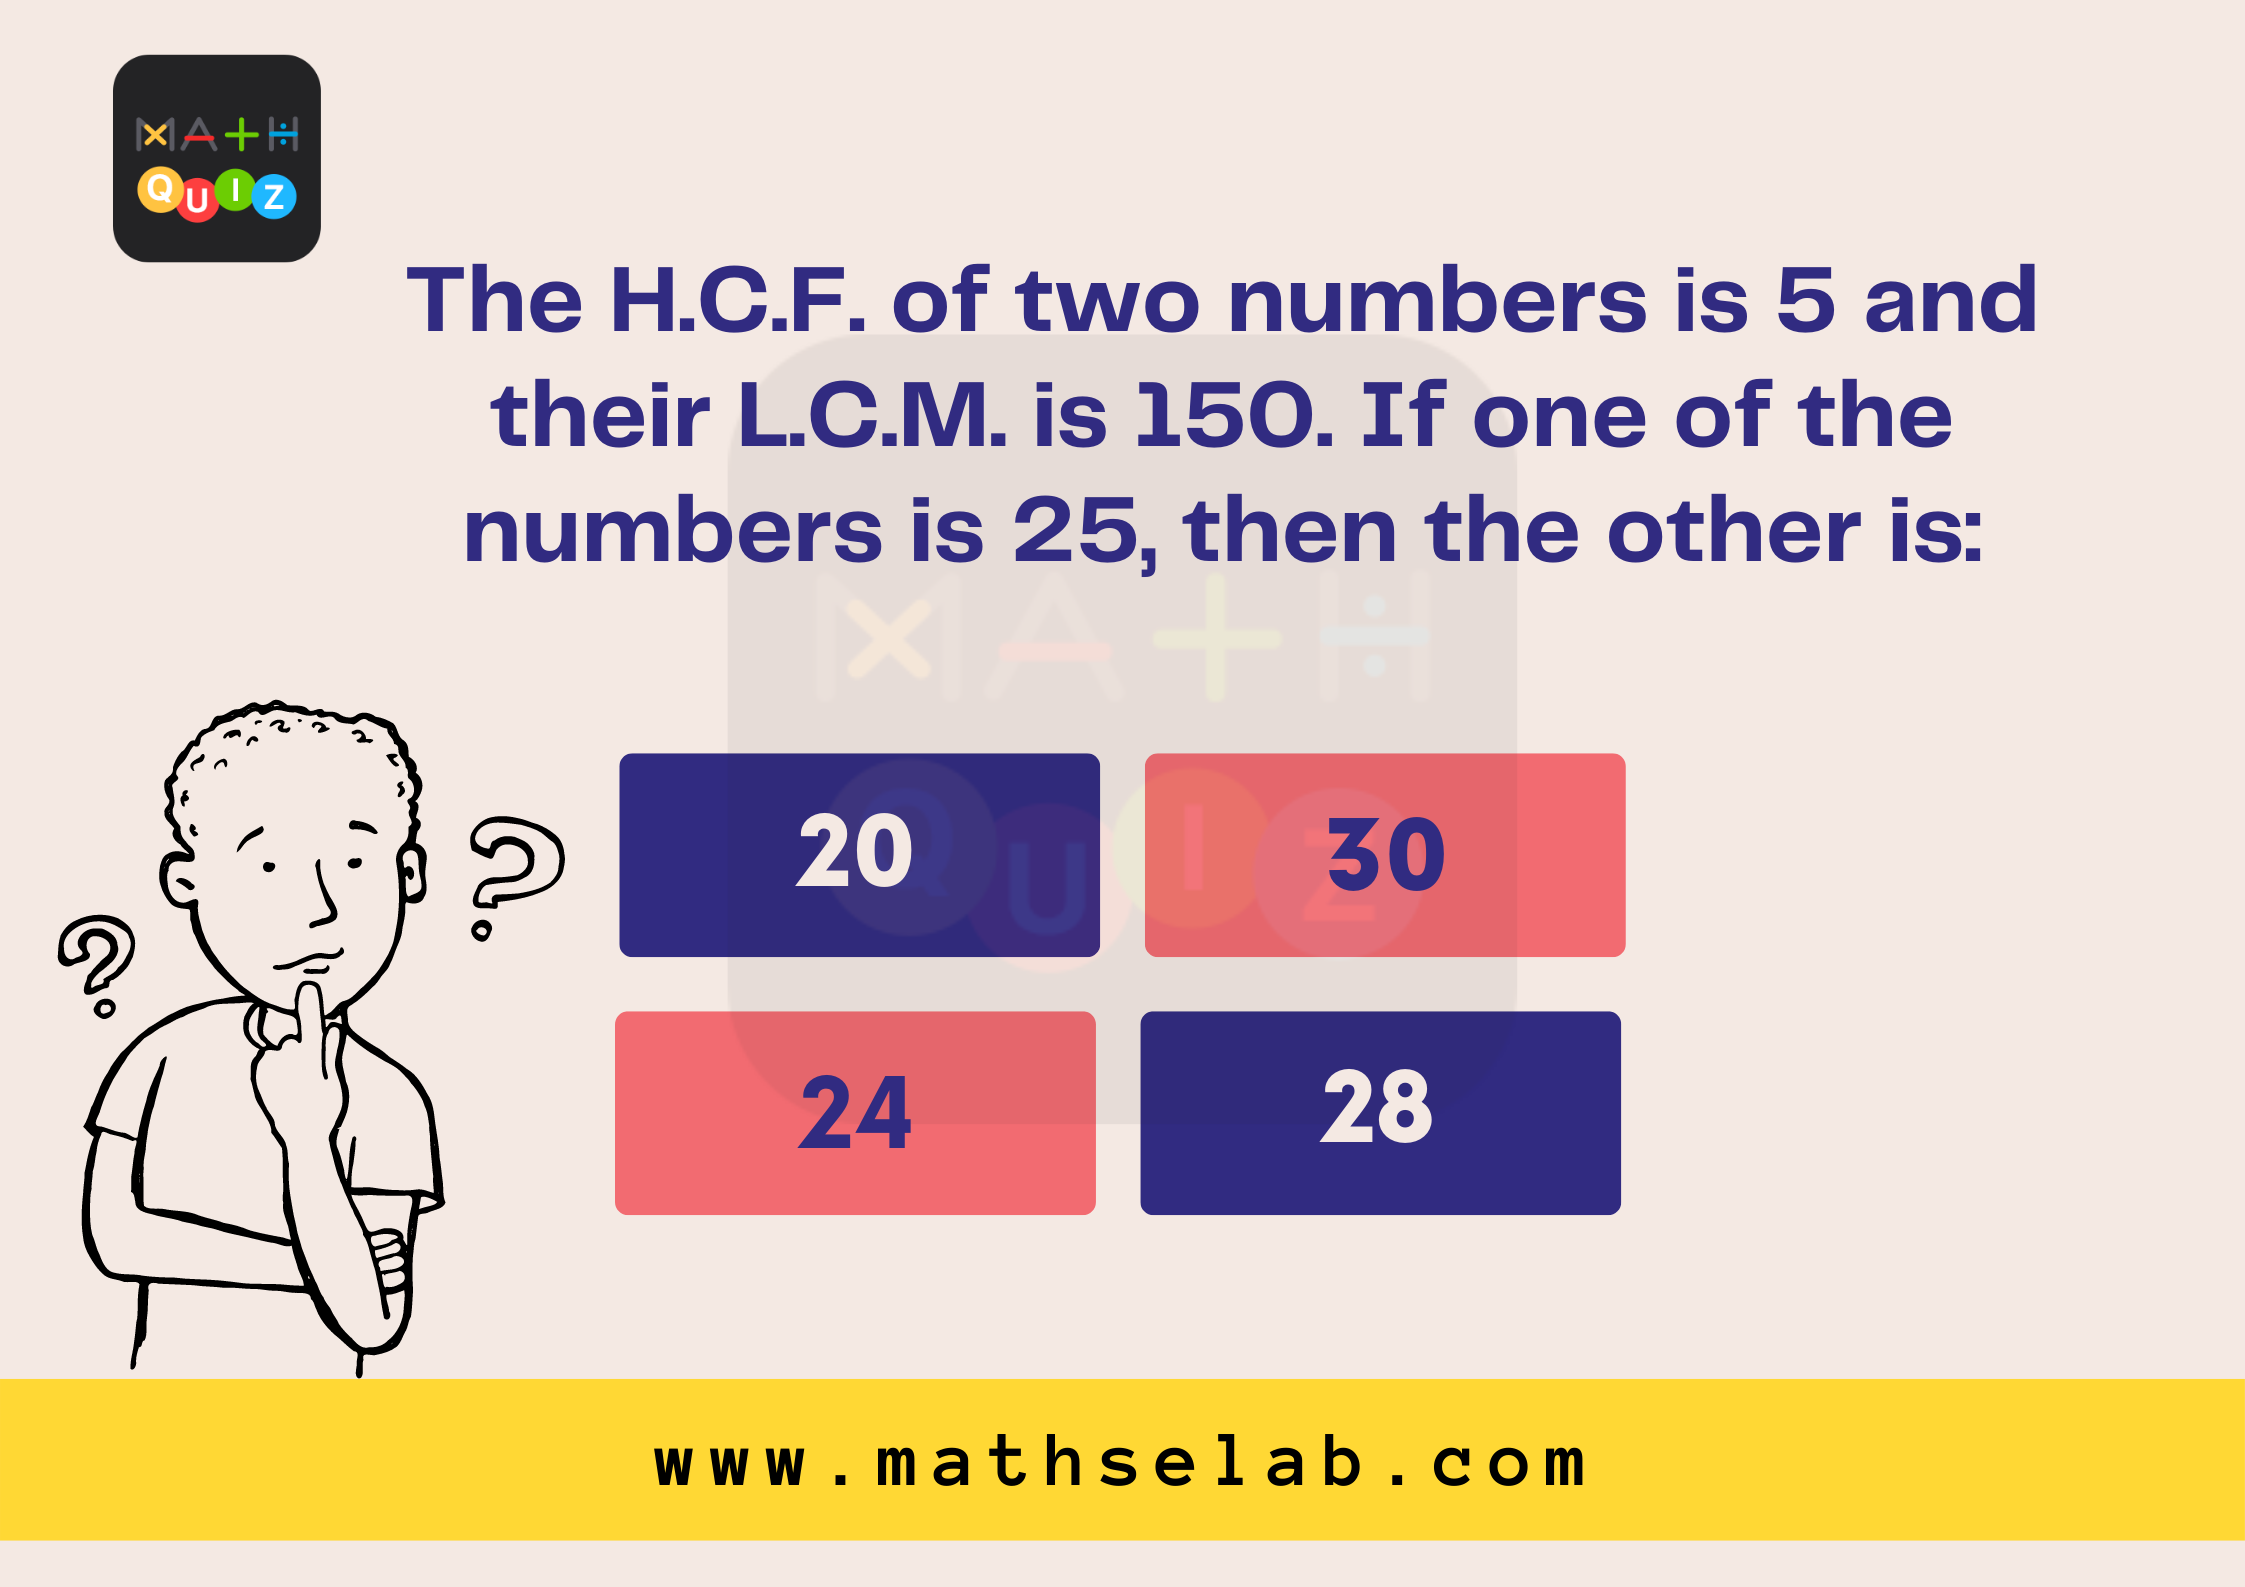 The H.C.F. of two numbers is 5 and their L.C.M. is 150. If one of the numbers is 25, then the other is: